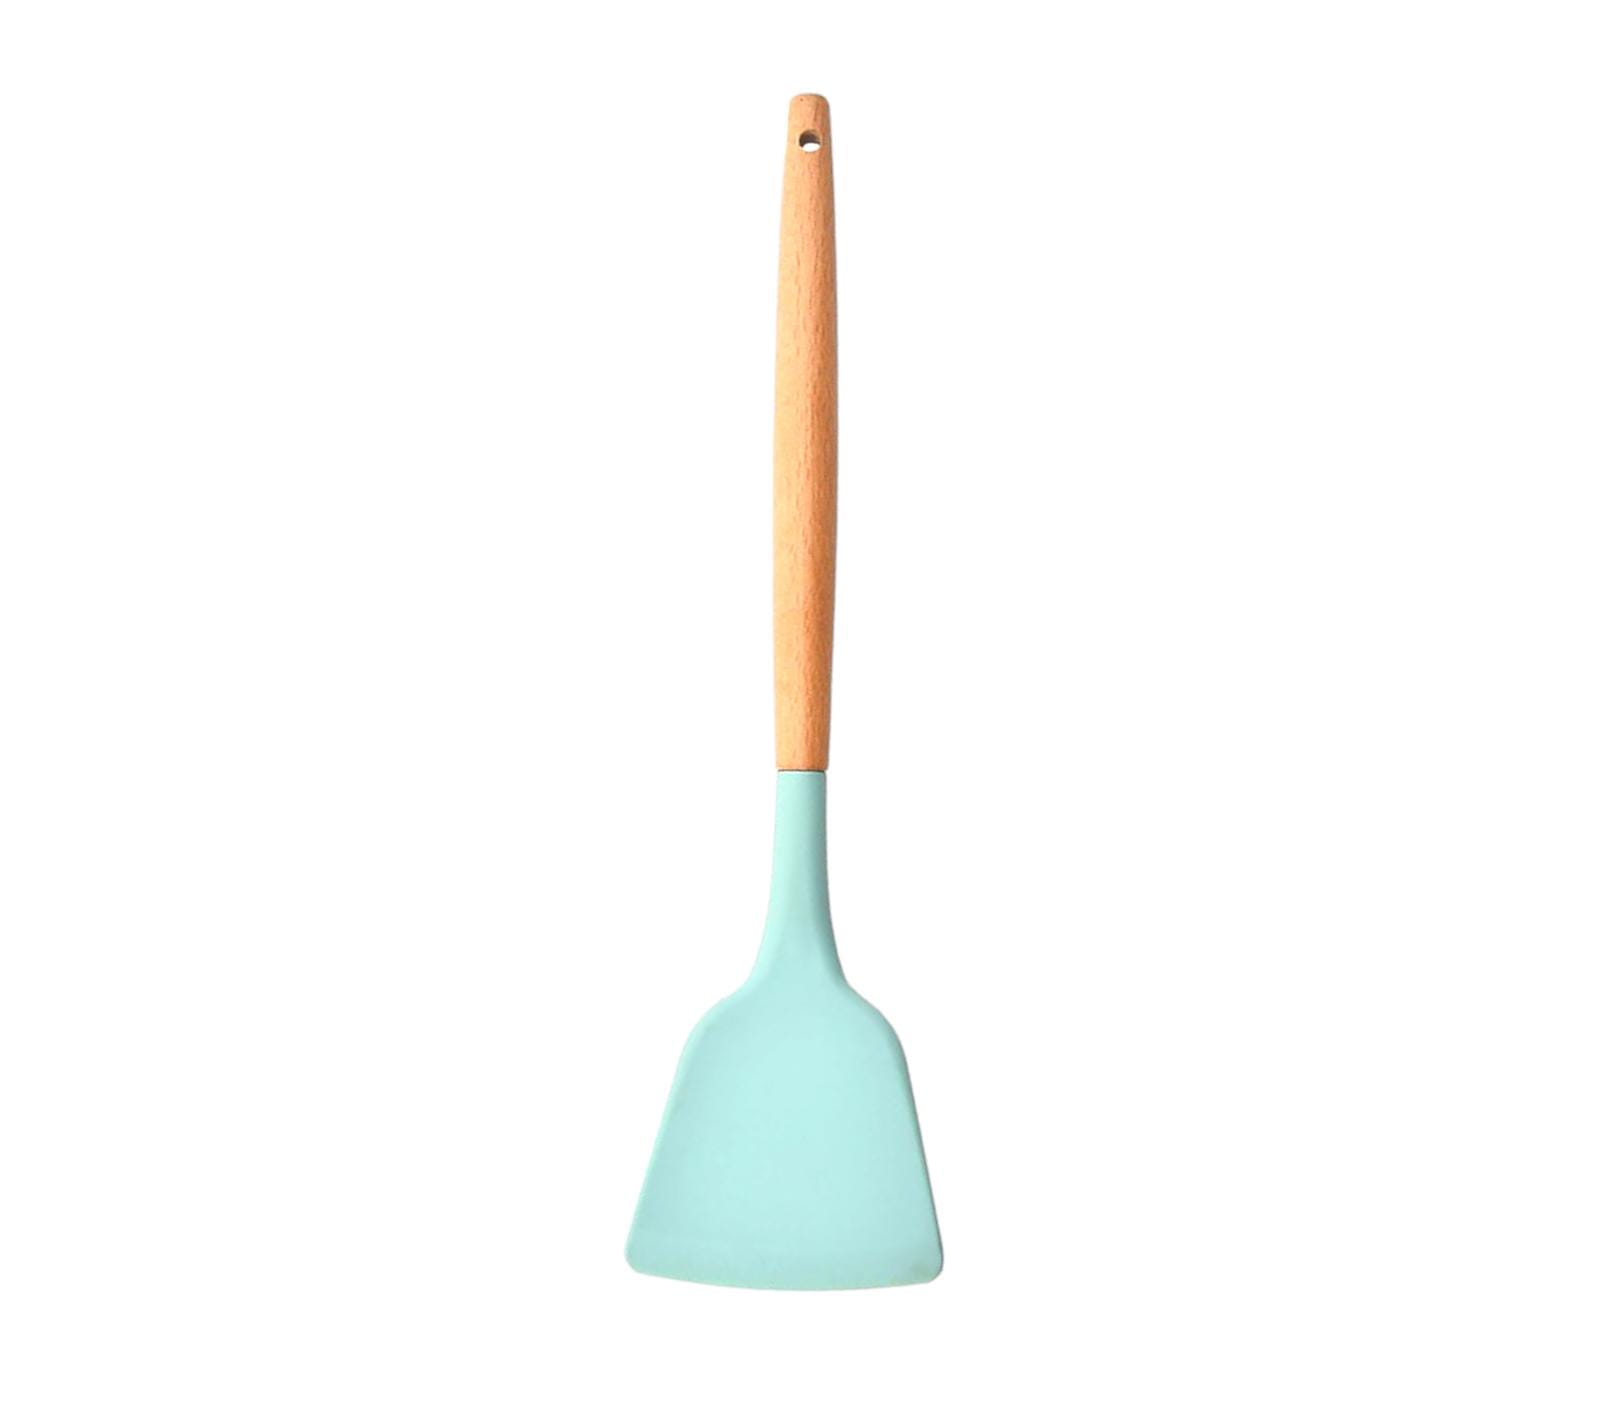 Spatula With Wooden Handle